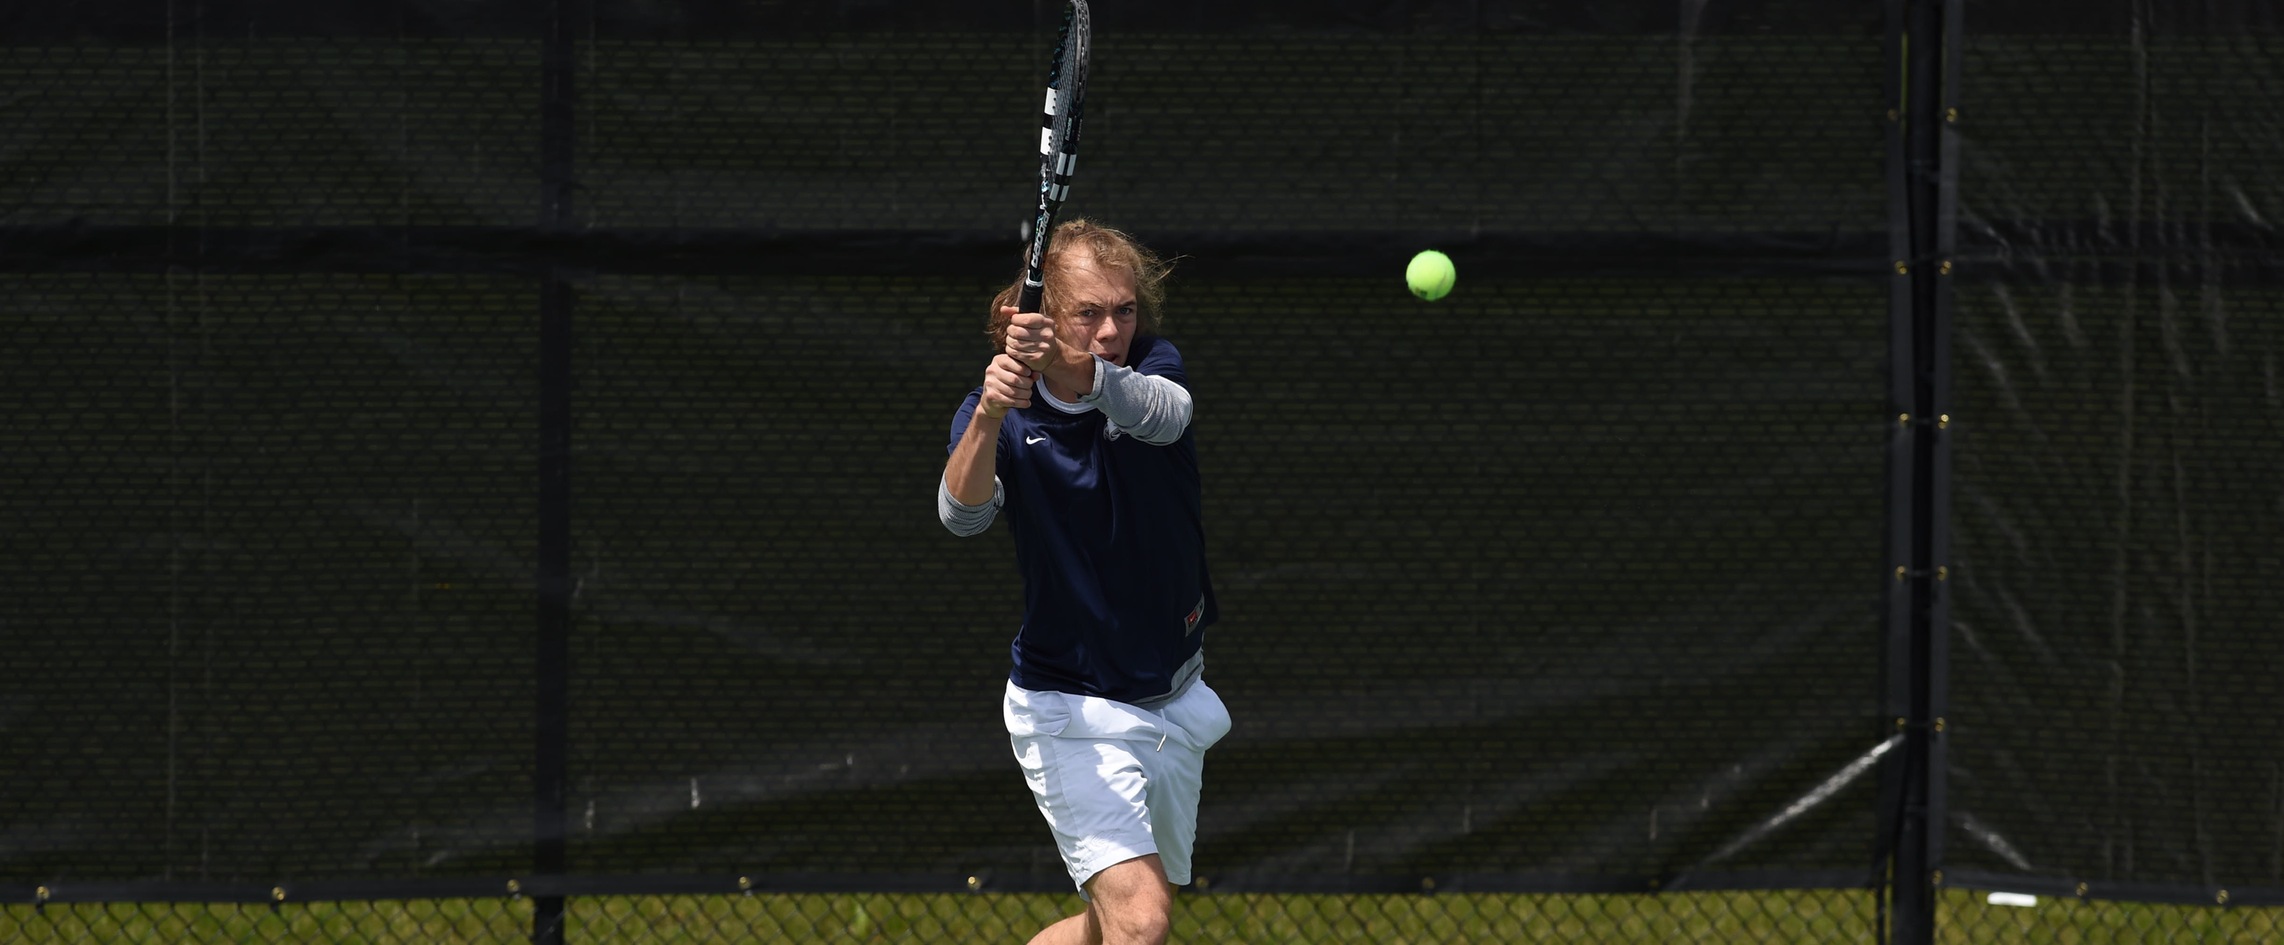 Men’s Tennis Starts Season With a Sweep